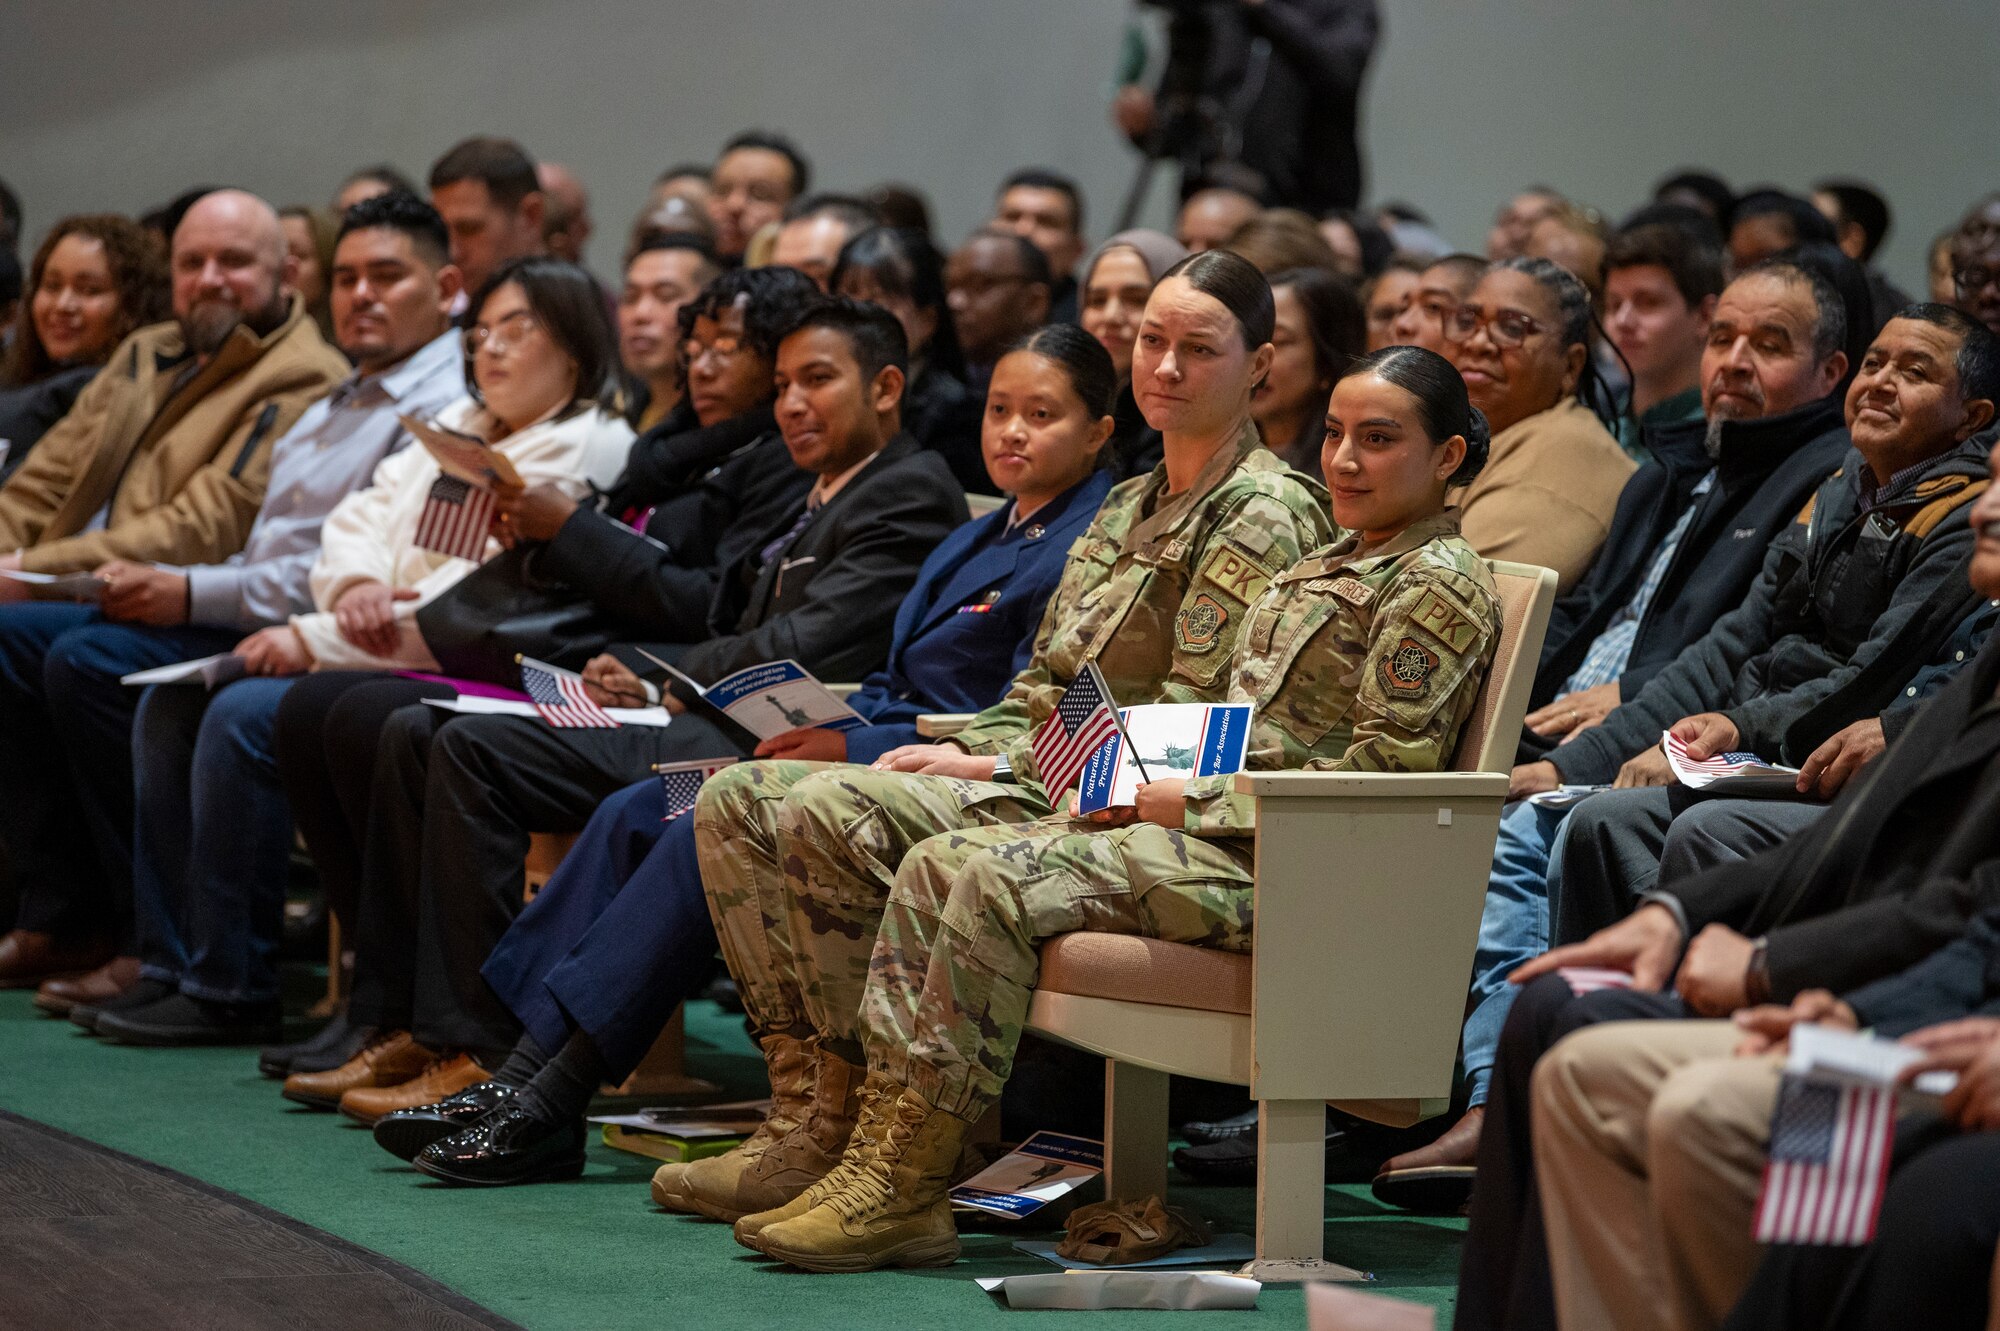 Airman Lissbeth Cardenas Idrovo, right, 22nd Contracting Squadron contracting specialist, attend a Kansas Naturalization Ceremony Jan. 20, 2023, in Wichita, Kansas. She is accompanied by her supervisor, left, Staff Sgt. Cassandria McAfee. Airman Idrovo was one of two McConnell Airmen to become a U.S. Citizen that day, along with Airman Michelle Ashley, far left and in her blue service dress uniform. Airman Ashley is a full-time member of the Kansas Air National Guard's 184th Comptroller Flight at McConnell. During the ceremony 165 people from 46 countries became U.S. citizens. (U.S. Air Force photo by Airman 1st Class Brenden Beezley)